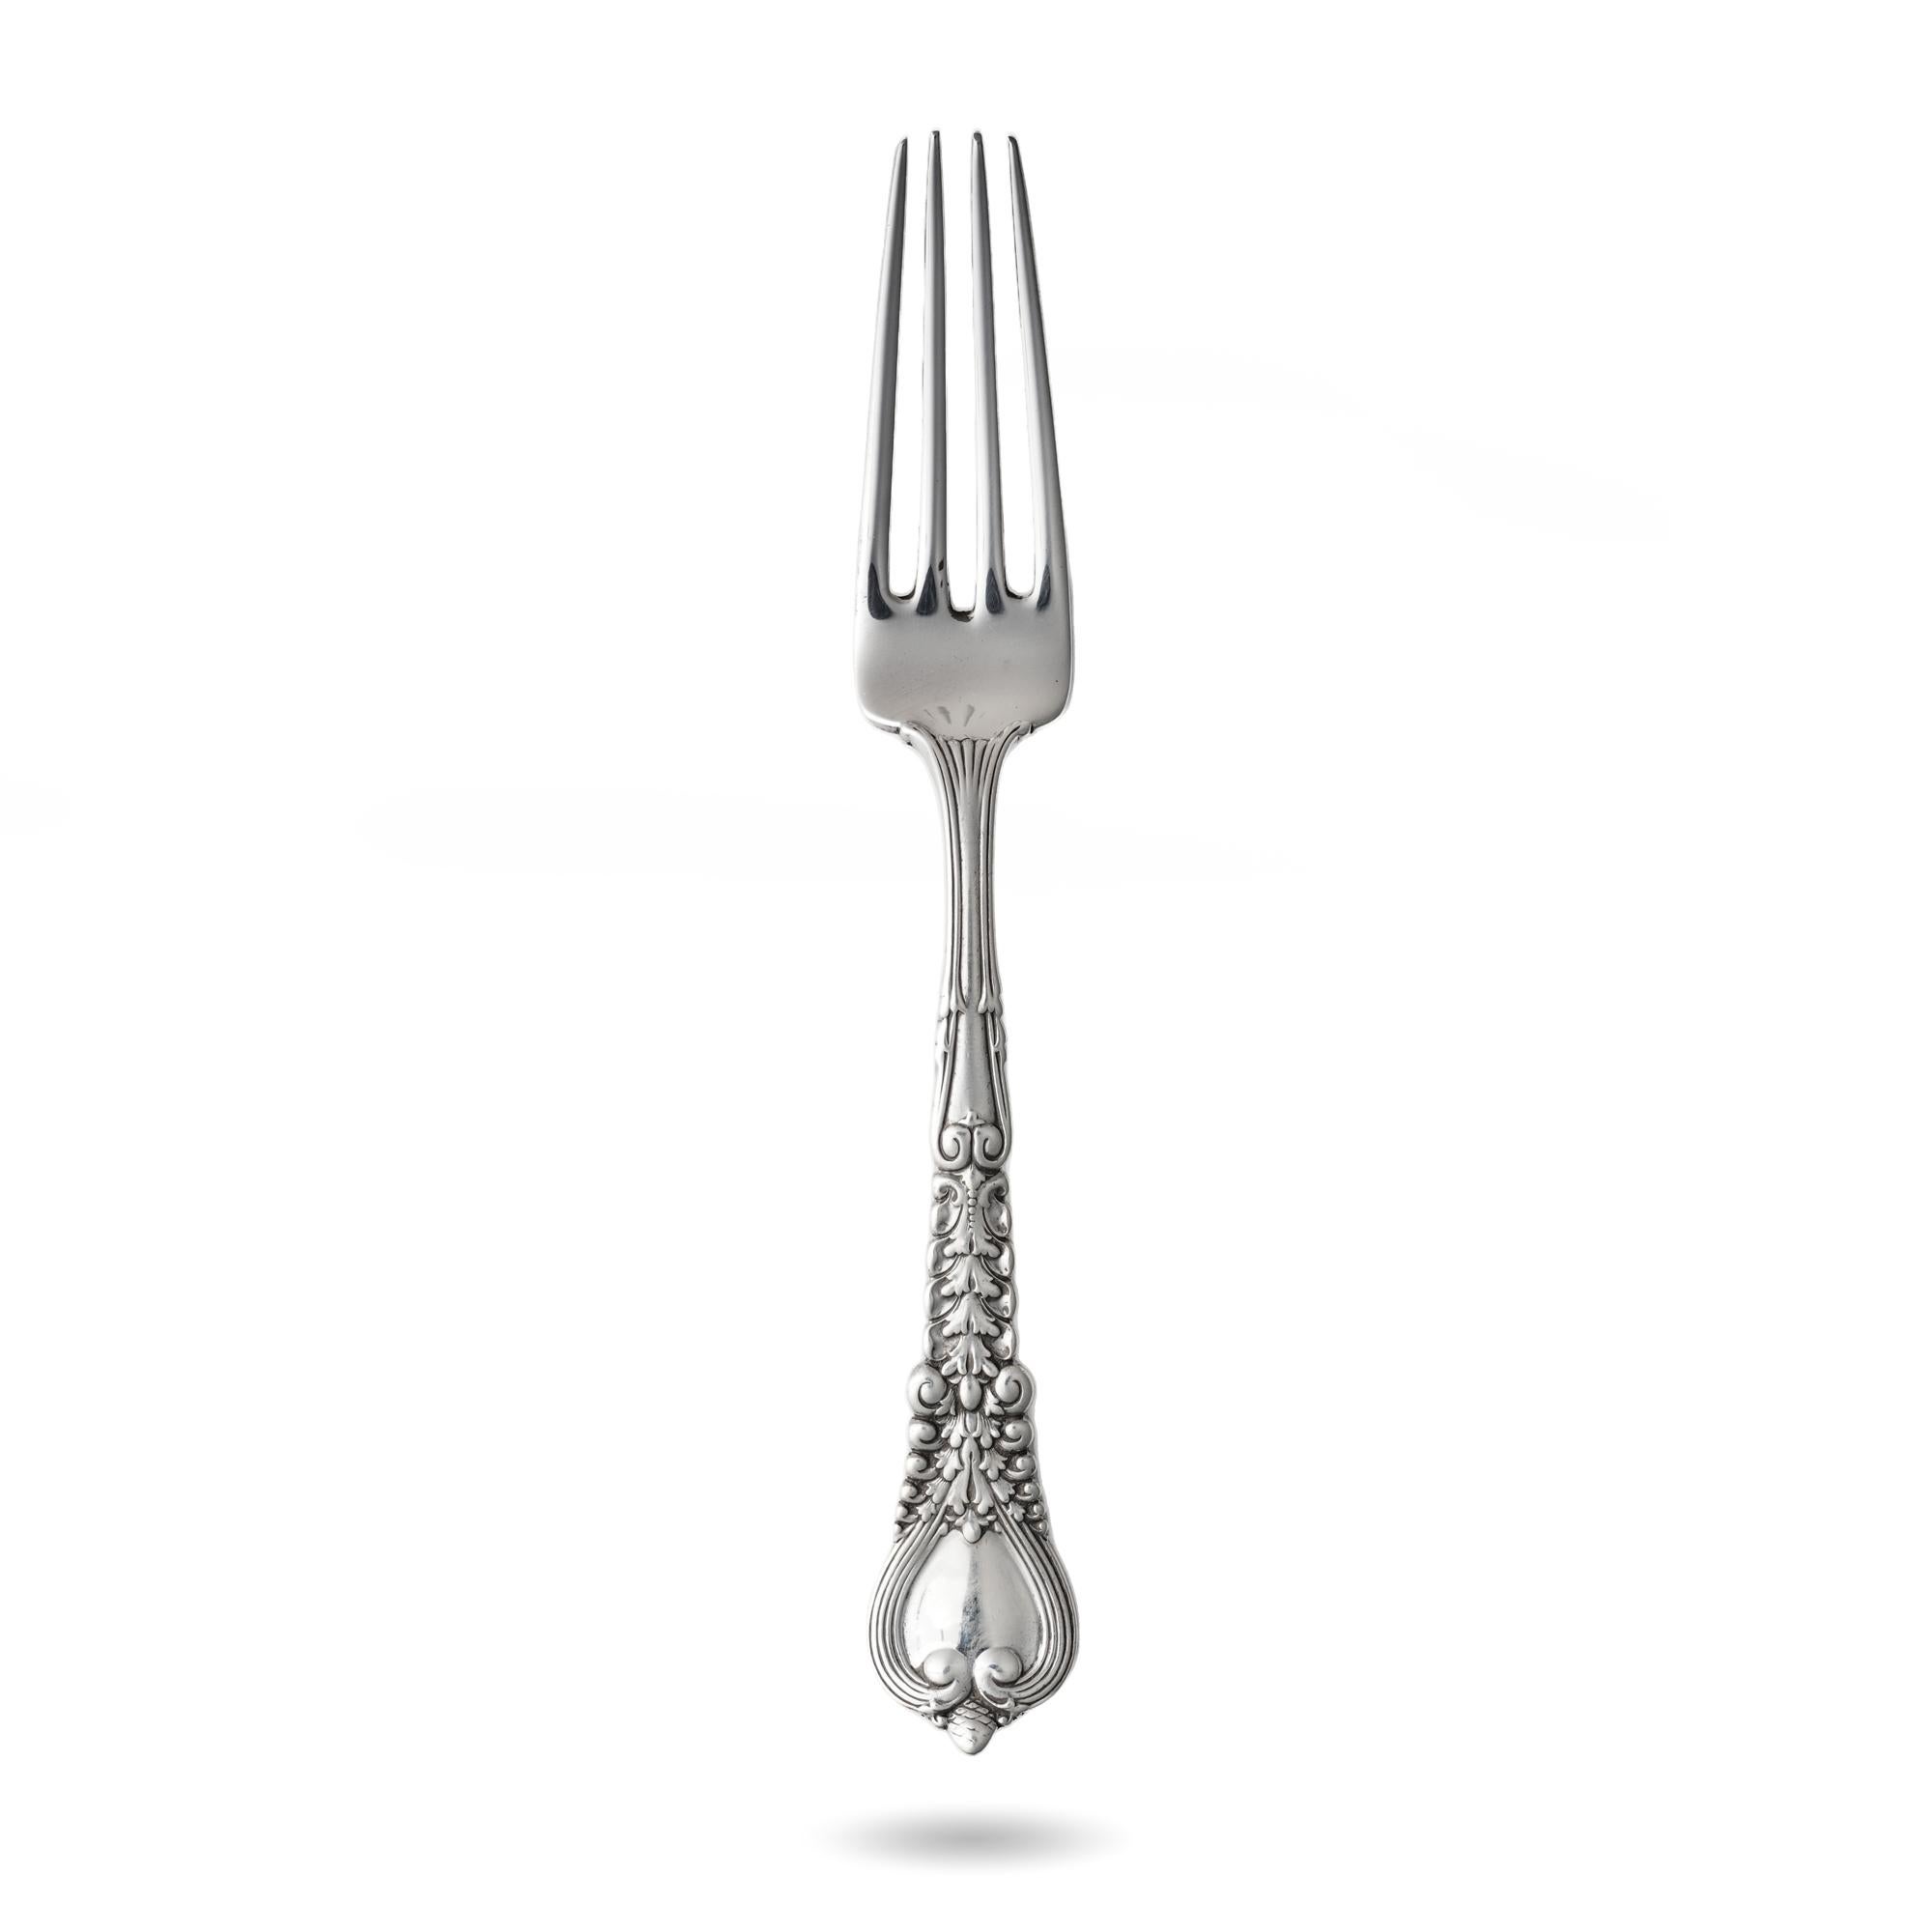 Antique Tiffany & Co. sterling silver Florentine pattern fork. 

Maker: Tiffany & Co
Pattern: Designed by Paulding Farnham
Style: Renaissance Revival
Introduced 1900, but the patent application not filed until May 9, 1904, issued June 7,